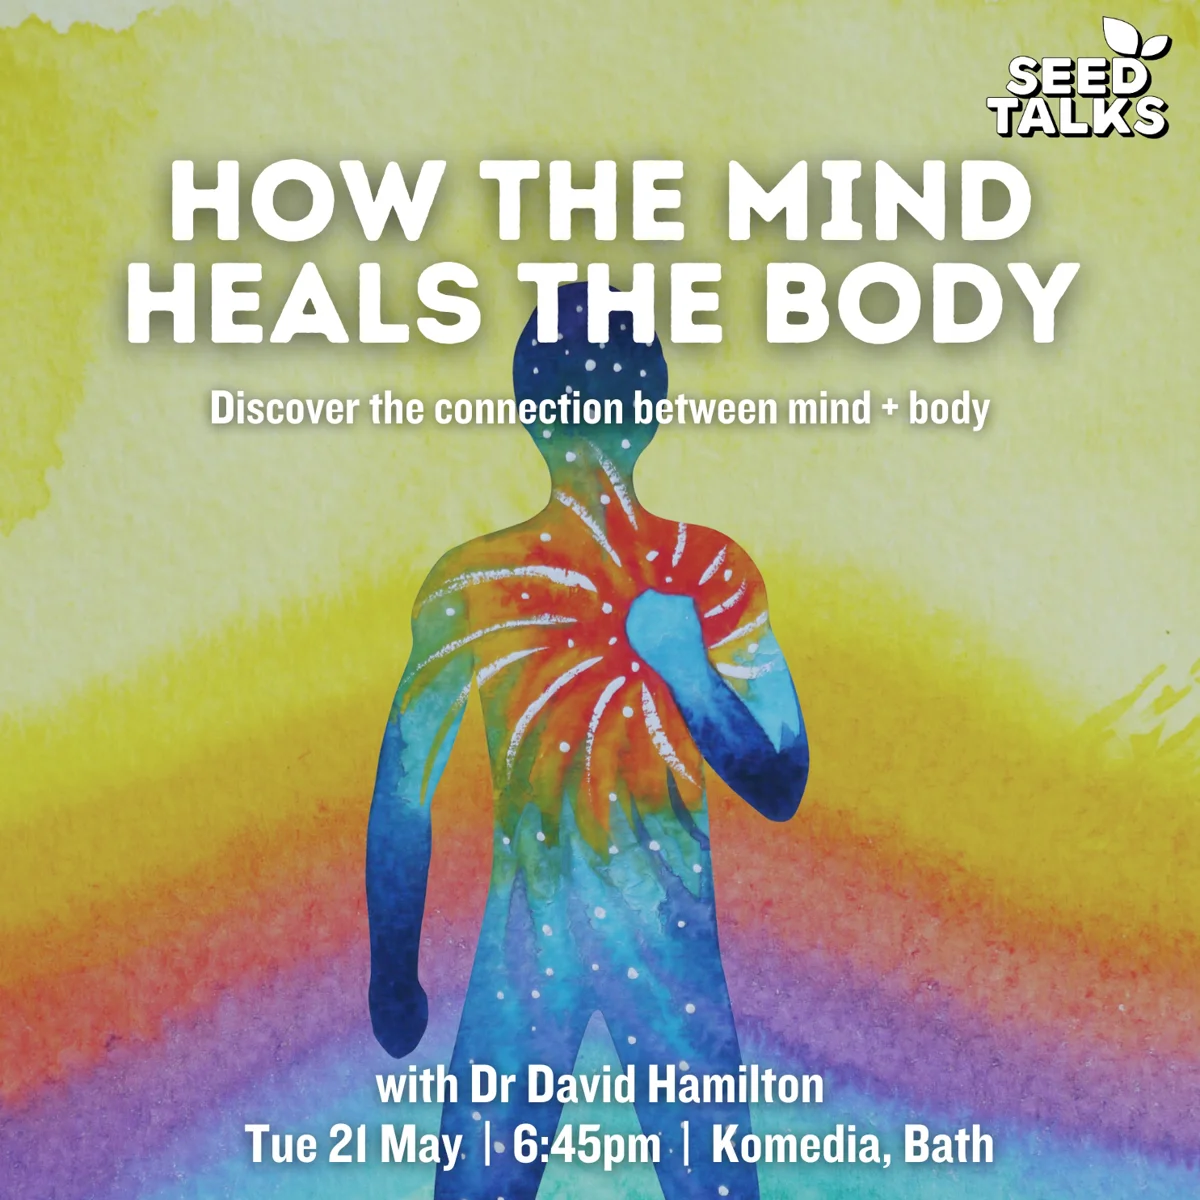 Seed Talks Pesent: How the Mind Heals the Body with Dr. David Hamilton